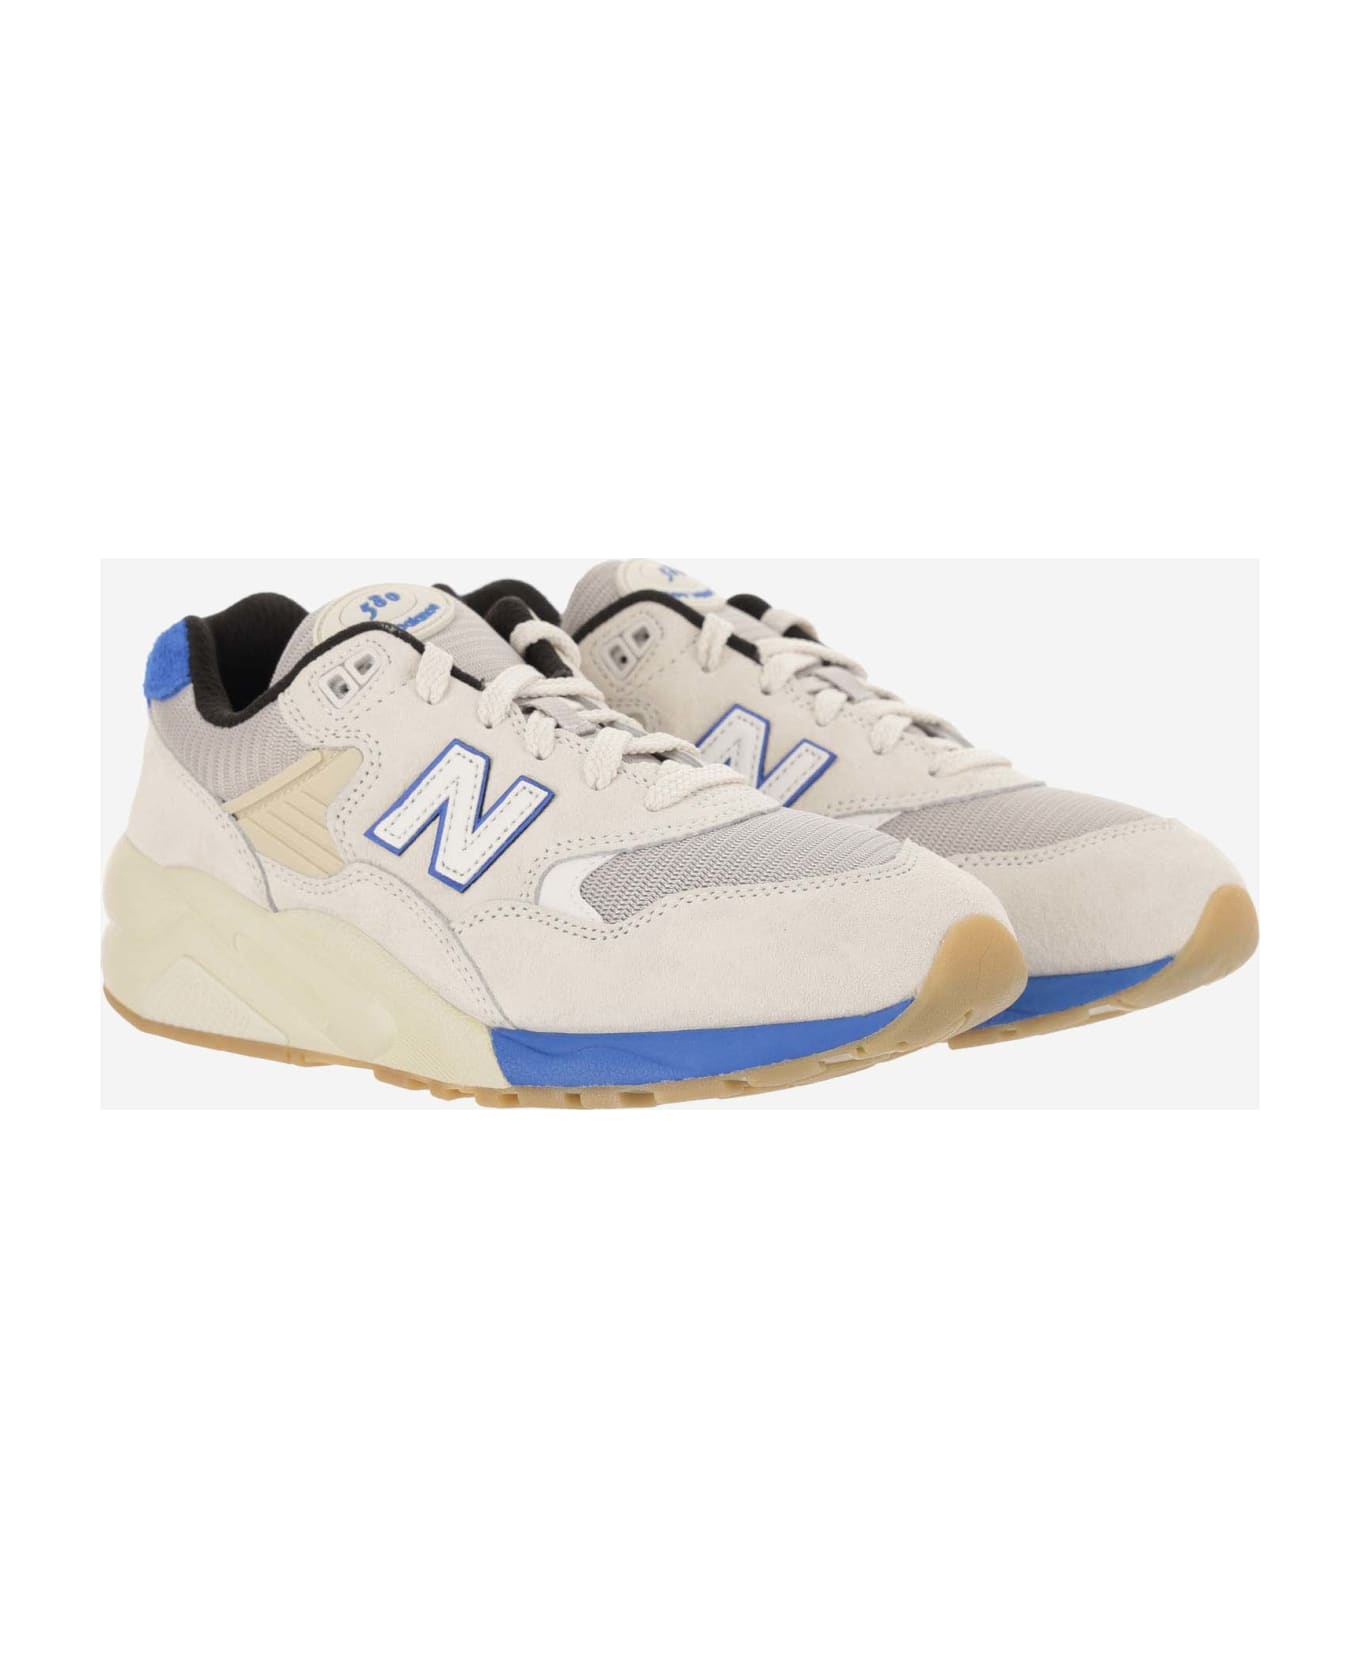 New Balance Sneakers 580 - White